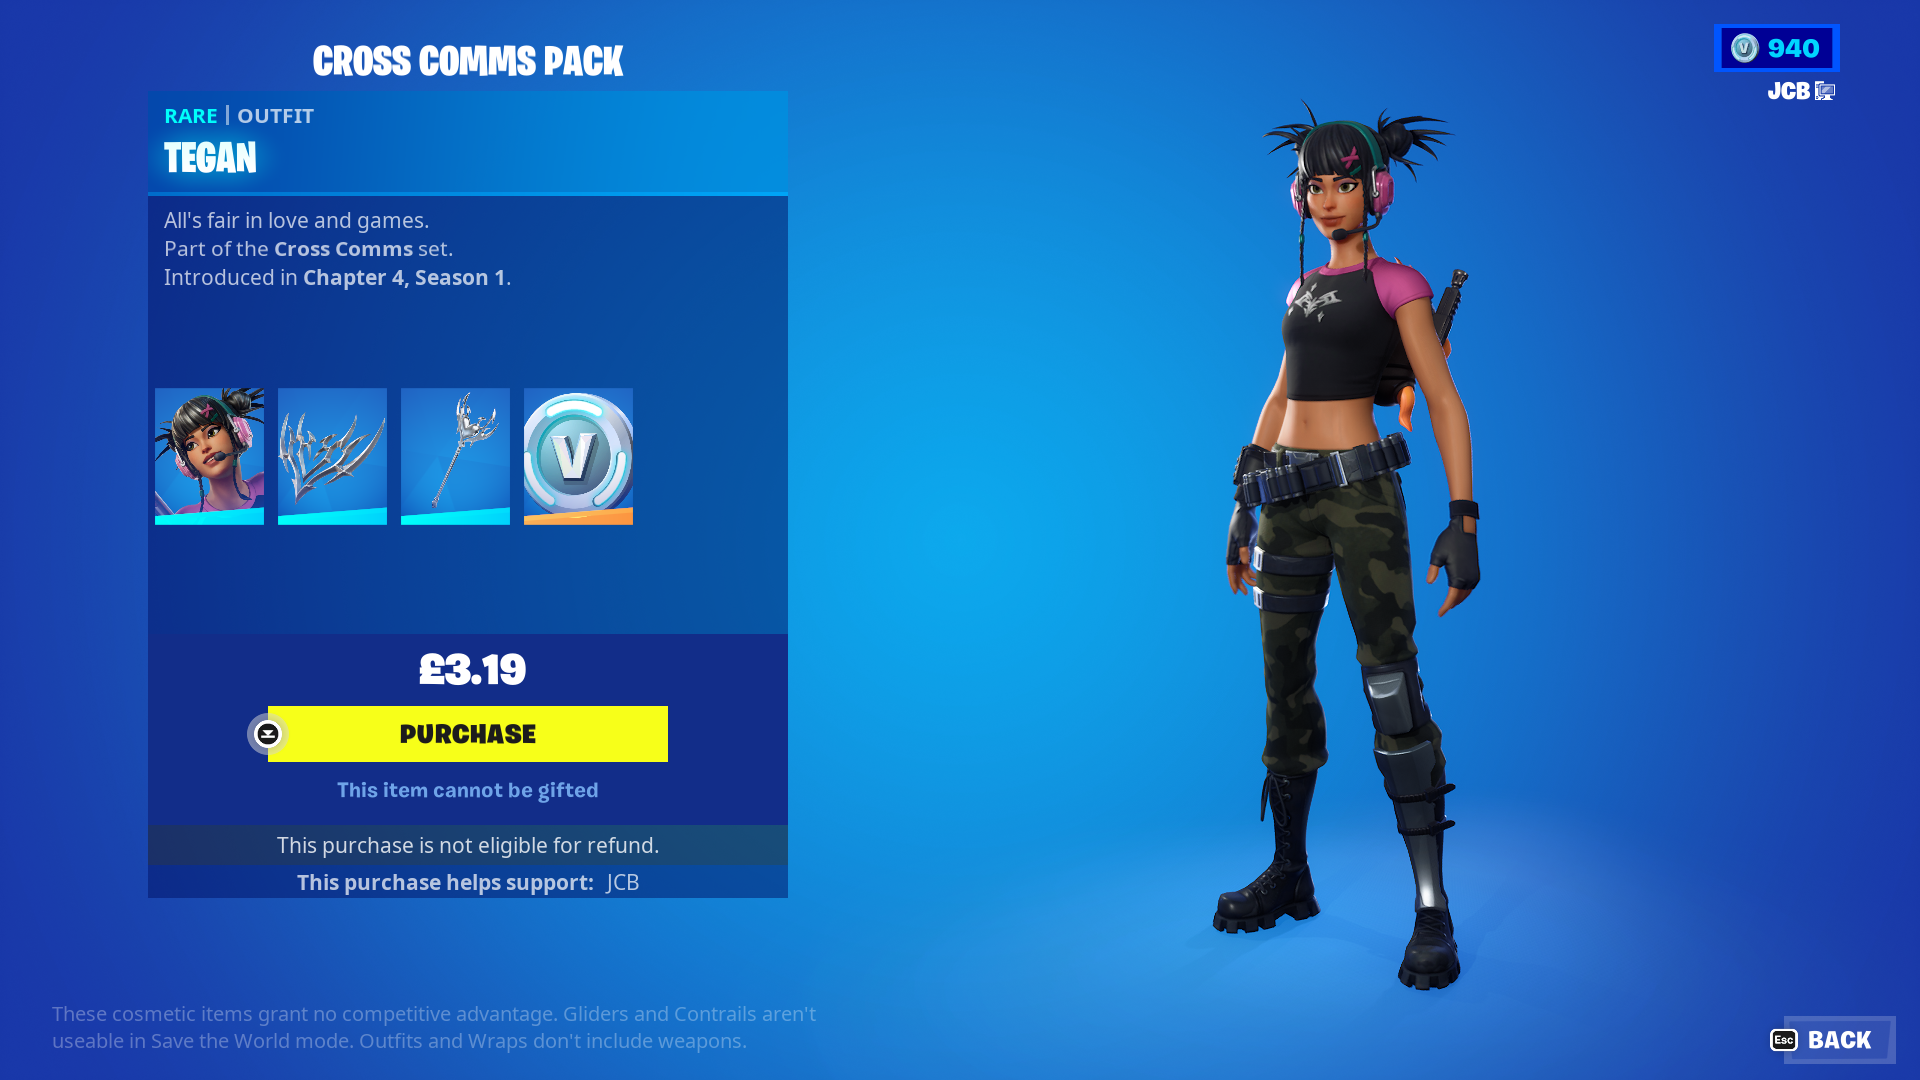 Cross Comms Pack - Epic Games Store